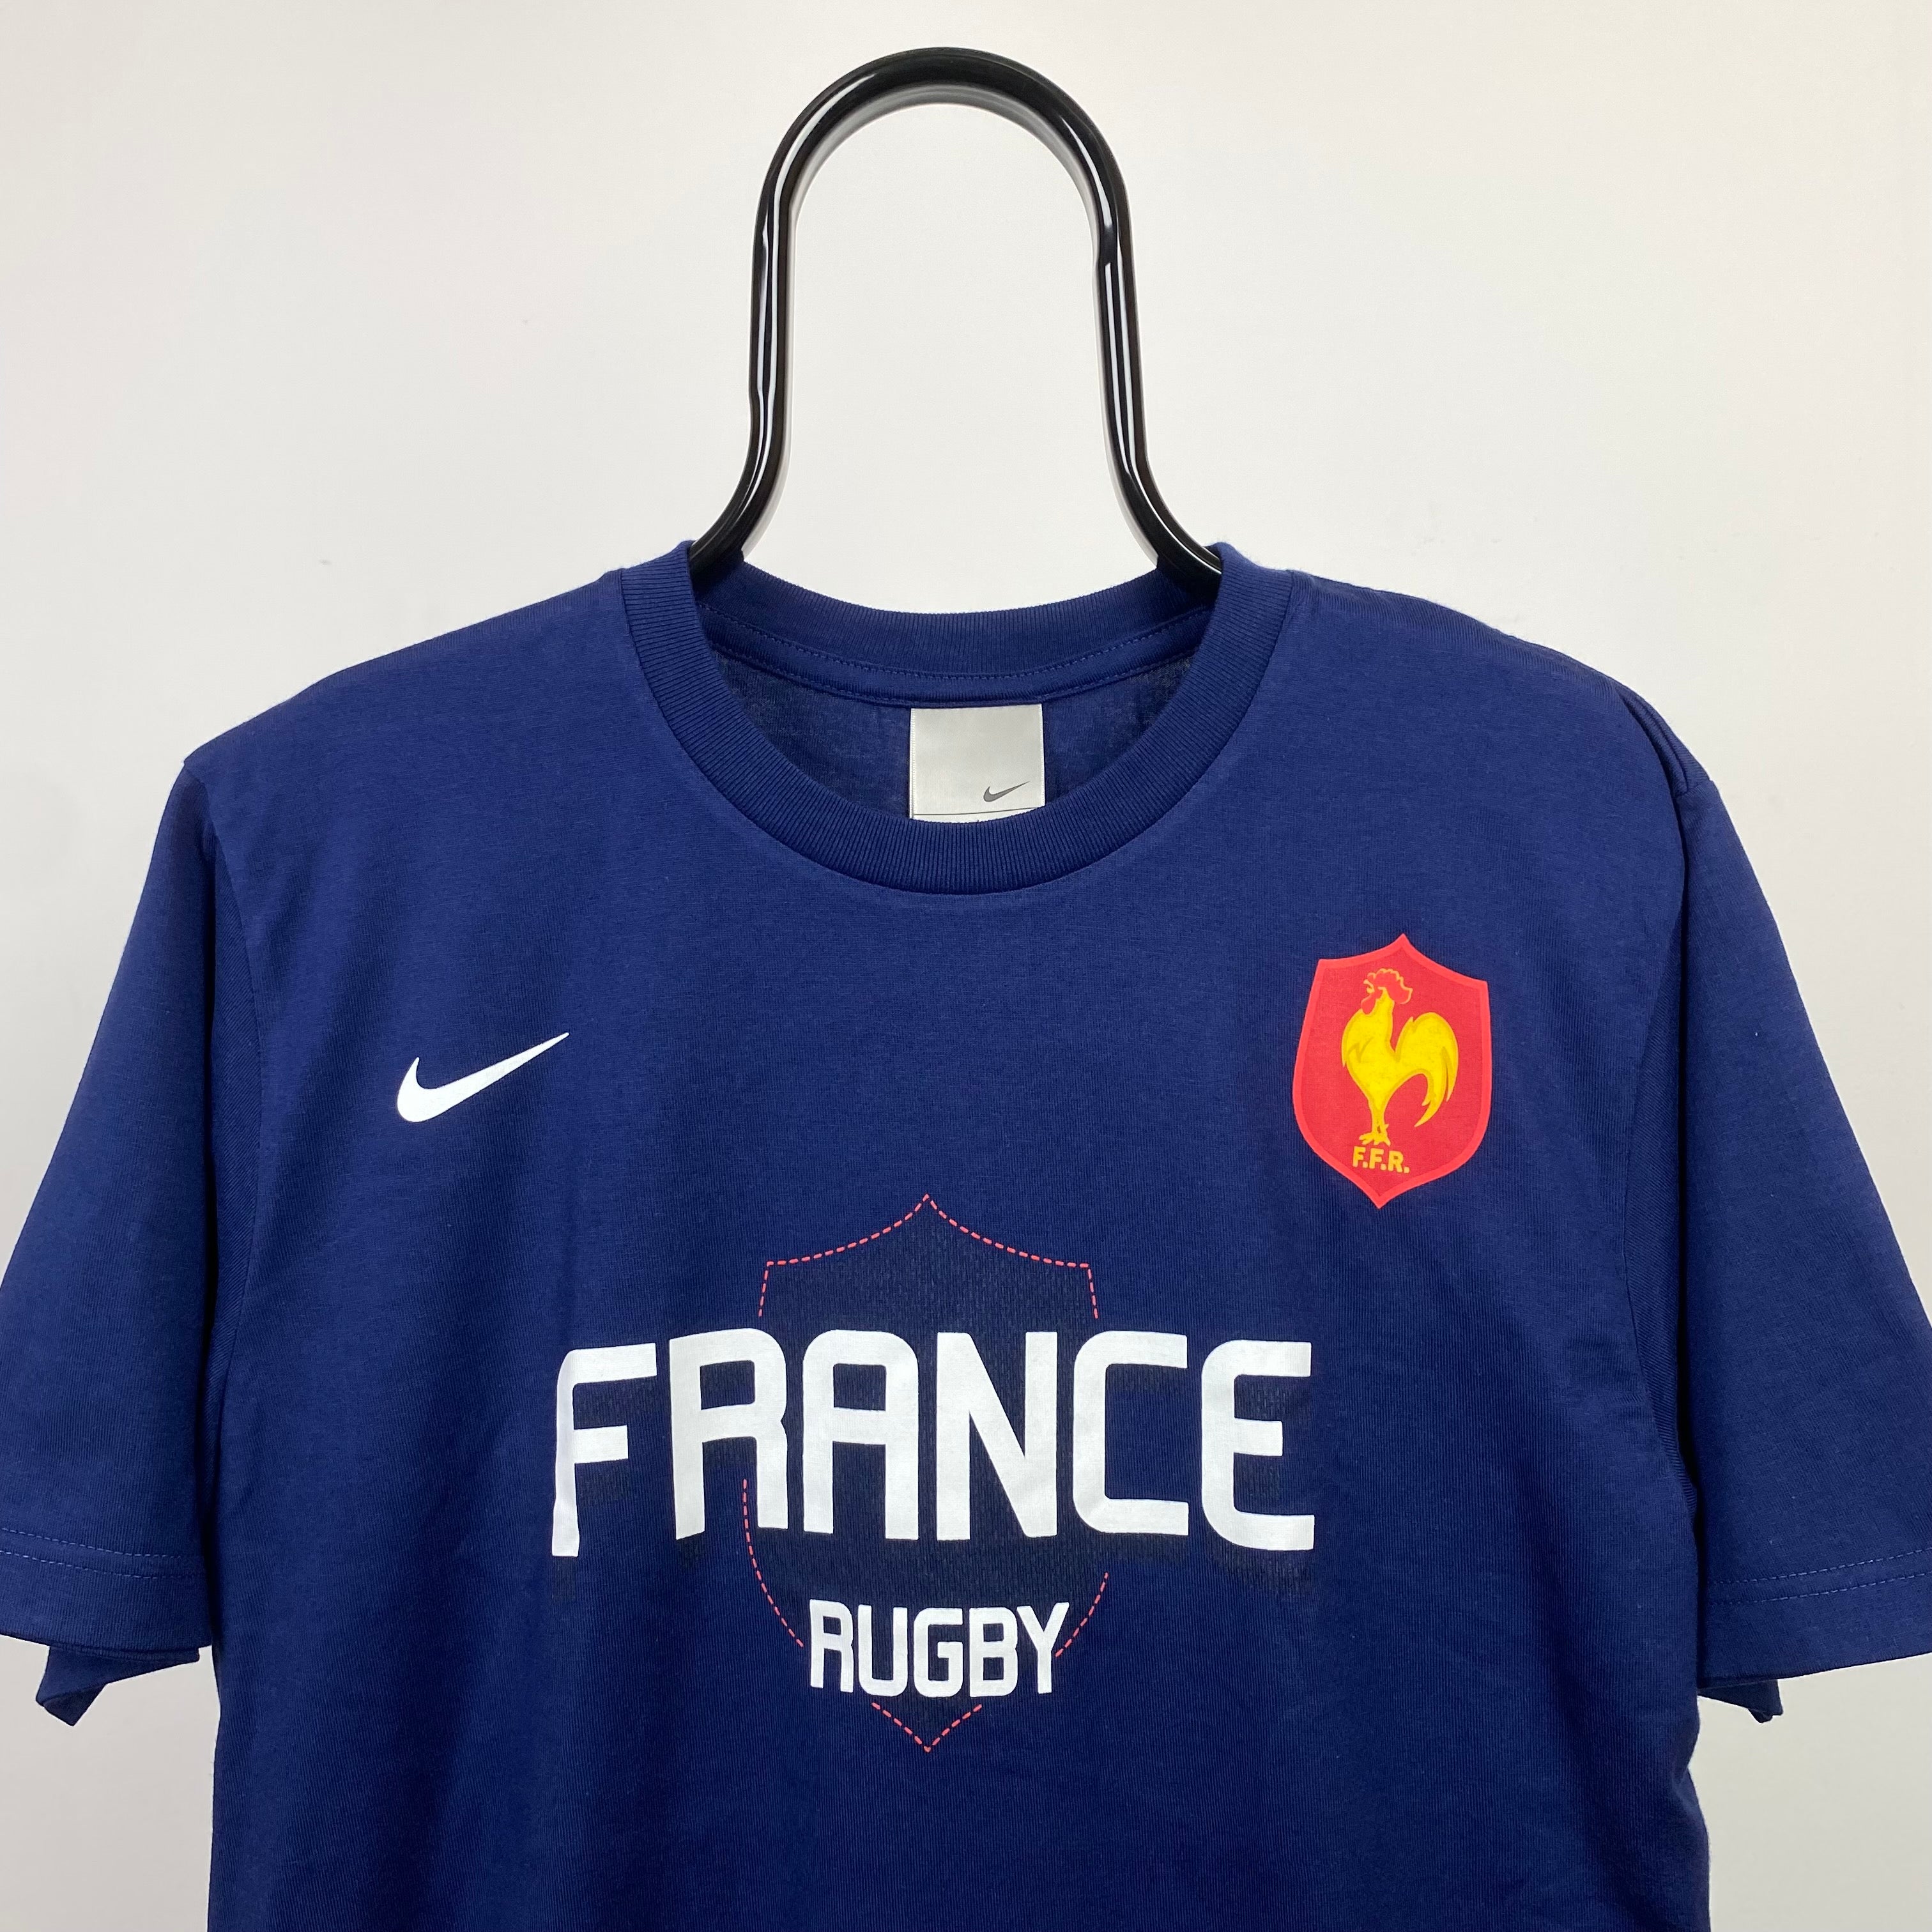 00s Nike France Rugby T-Shirt Blue Large